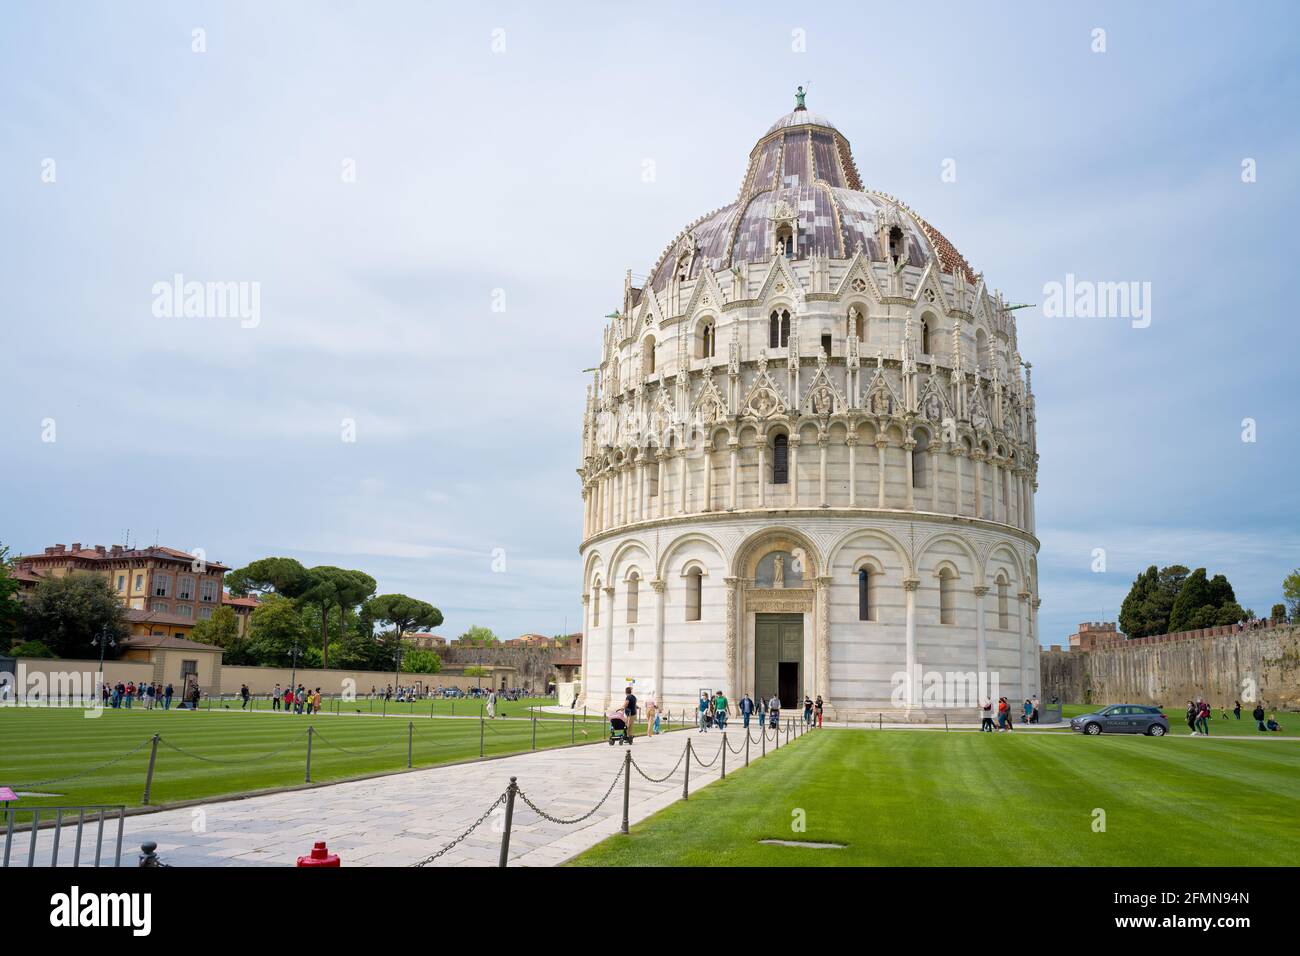 Pisa - May 2021: Square of Miracles (Piazza dei Miracoli) and The Baptistery of Pisa, Tuscany, Italy Stock Photo